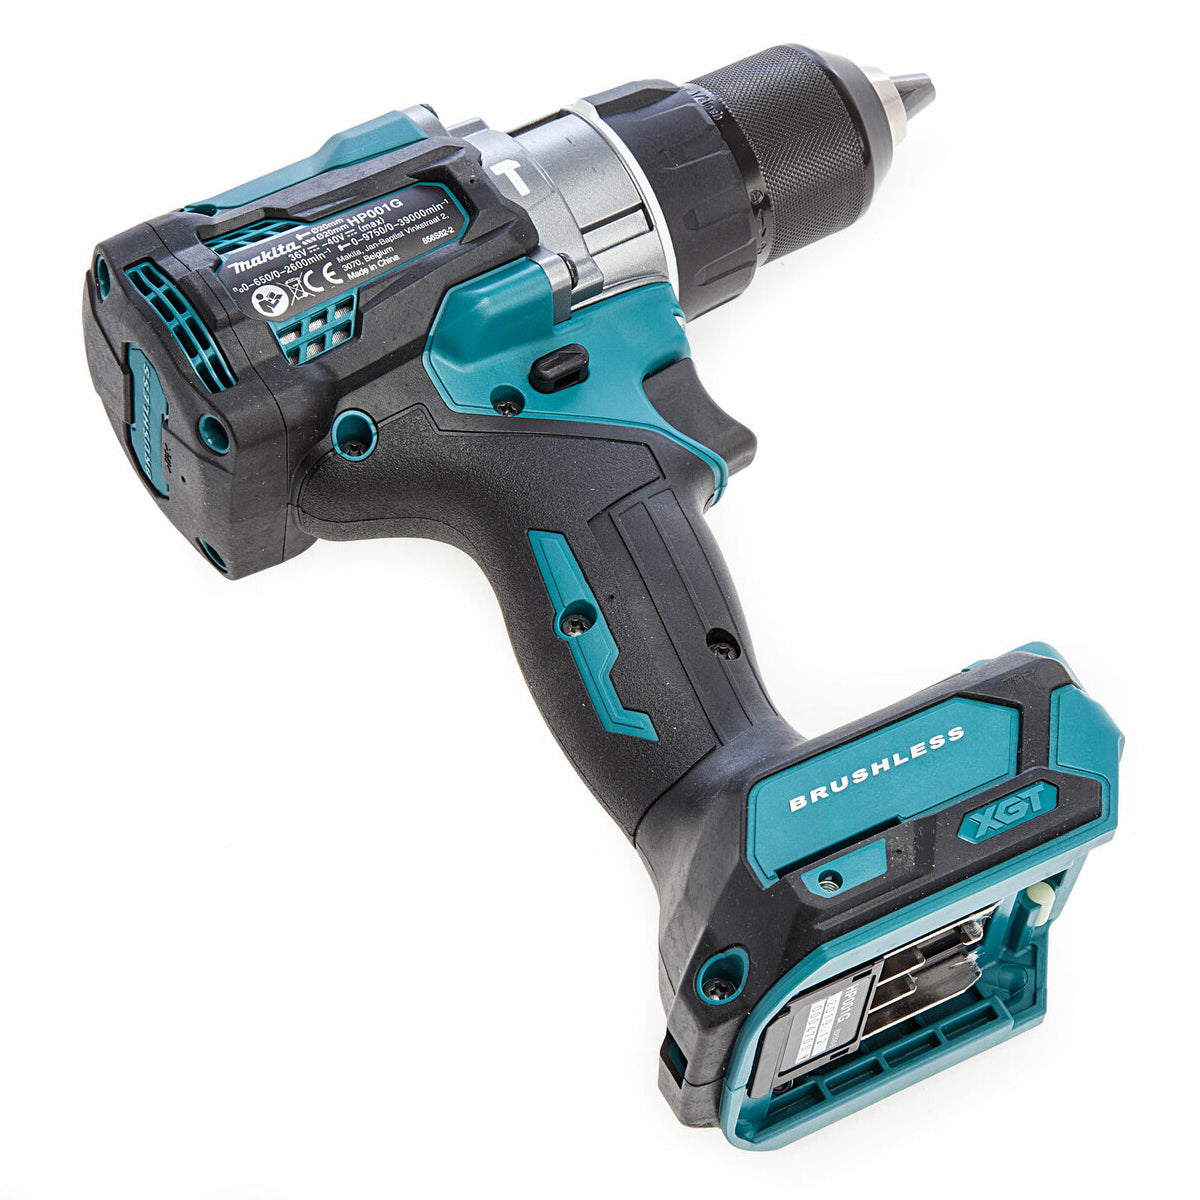 Makita HP001GZ 40V Brushless Combi Drill with 1 x 2.5Ah Battery & Charger